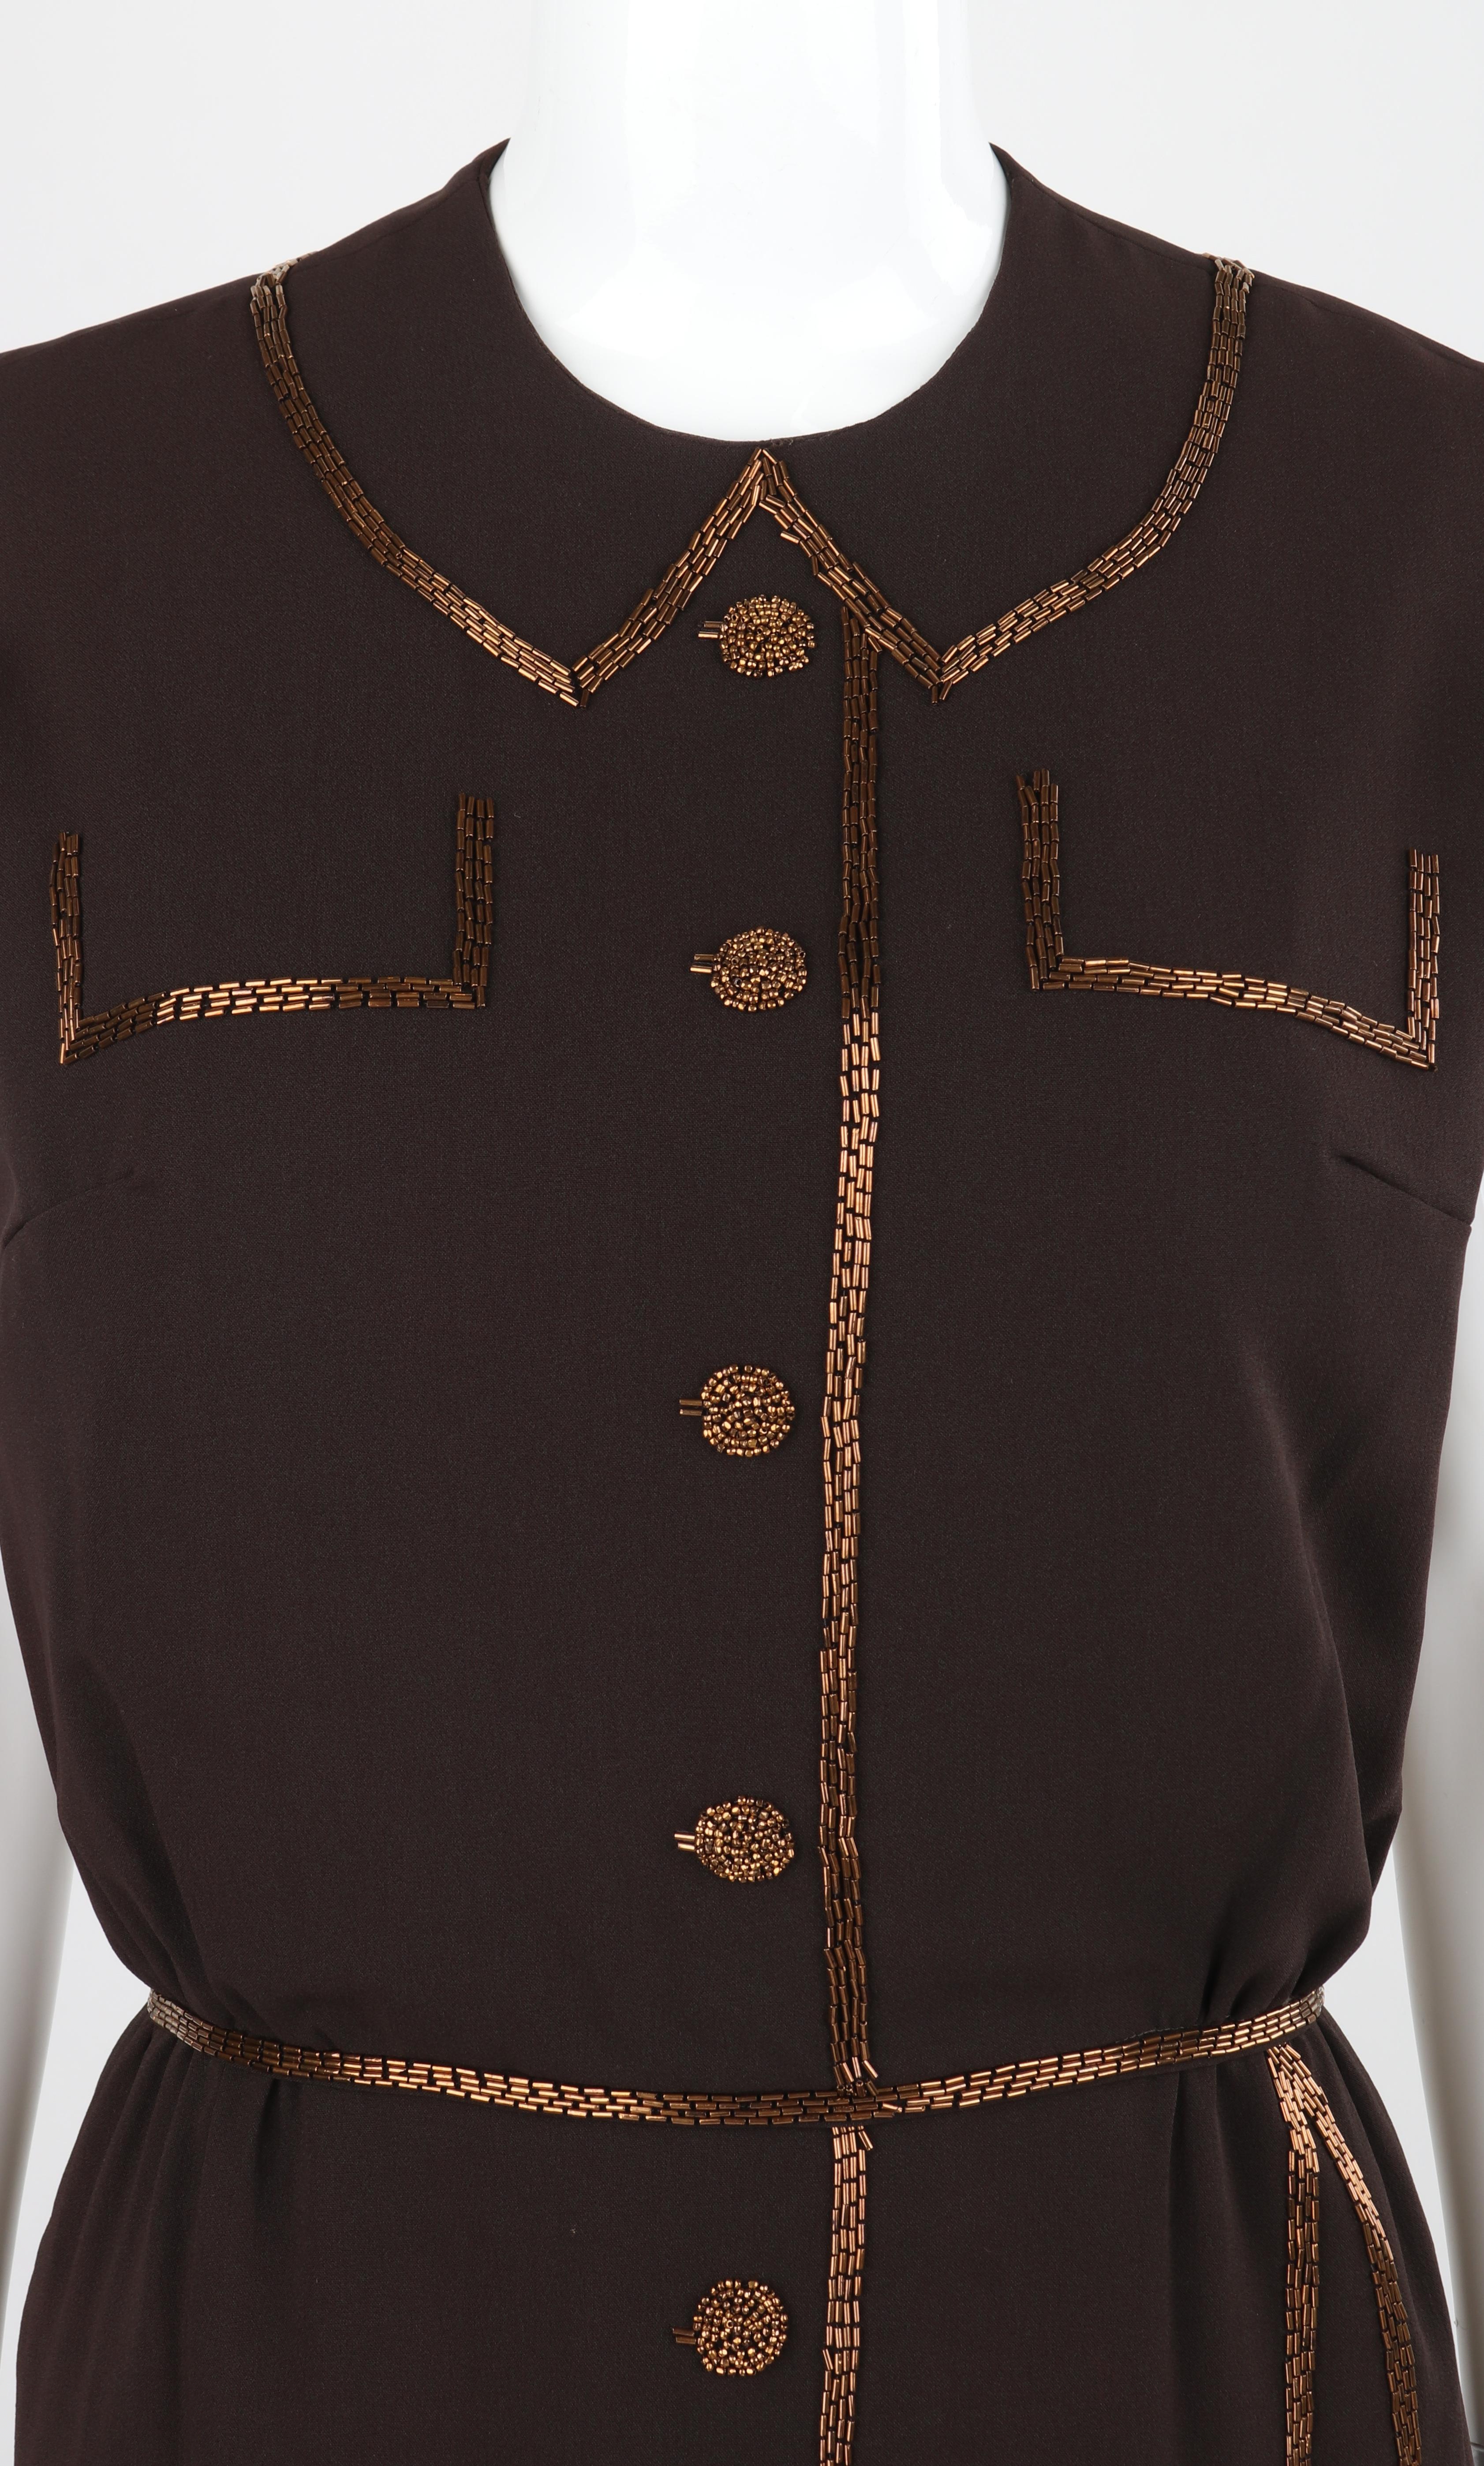 ROBBIE BEE c.1940's Vtg Brown Copper Hand Beaded Accent Trompe-L'oeil Day Dress For Sale 3